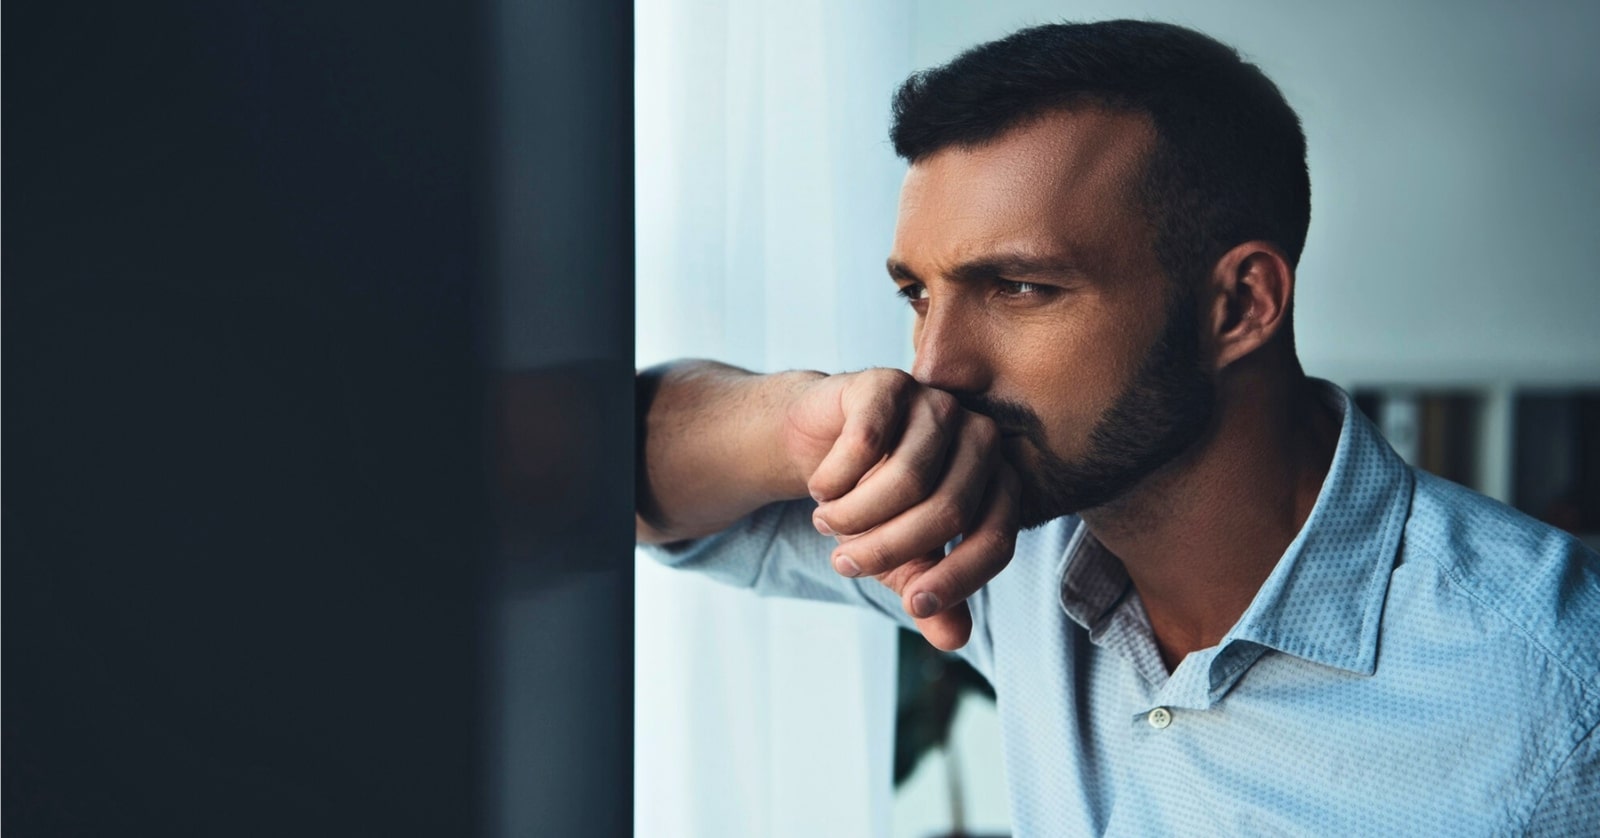 man leaning against wall with the back of his hand over his mouth as if he doesn't want to talk